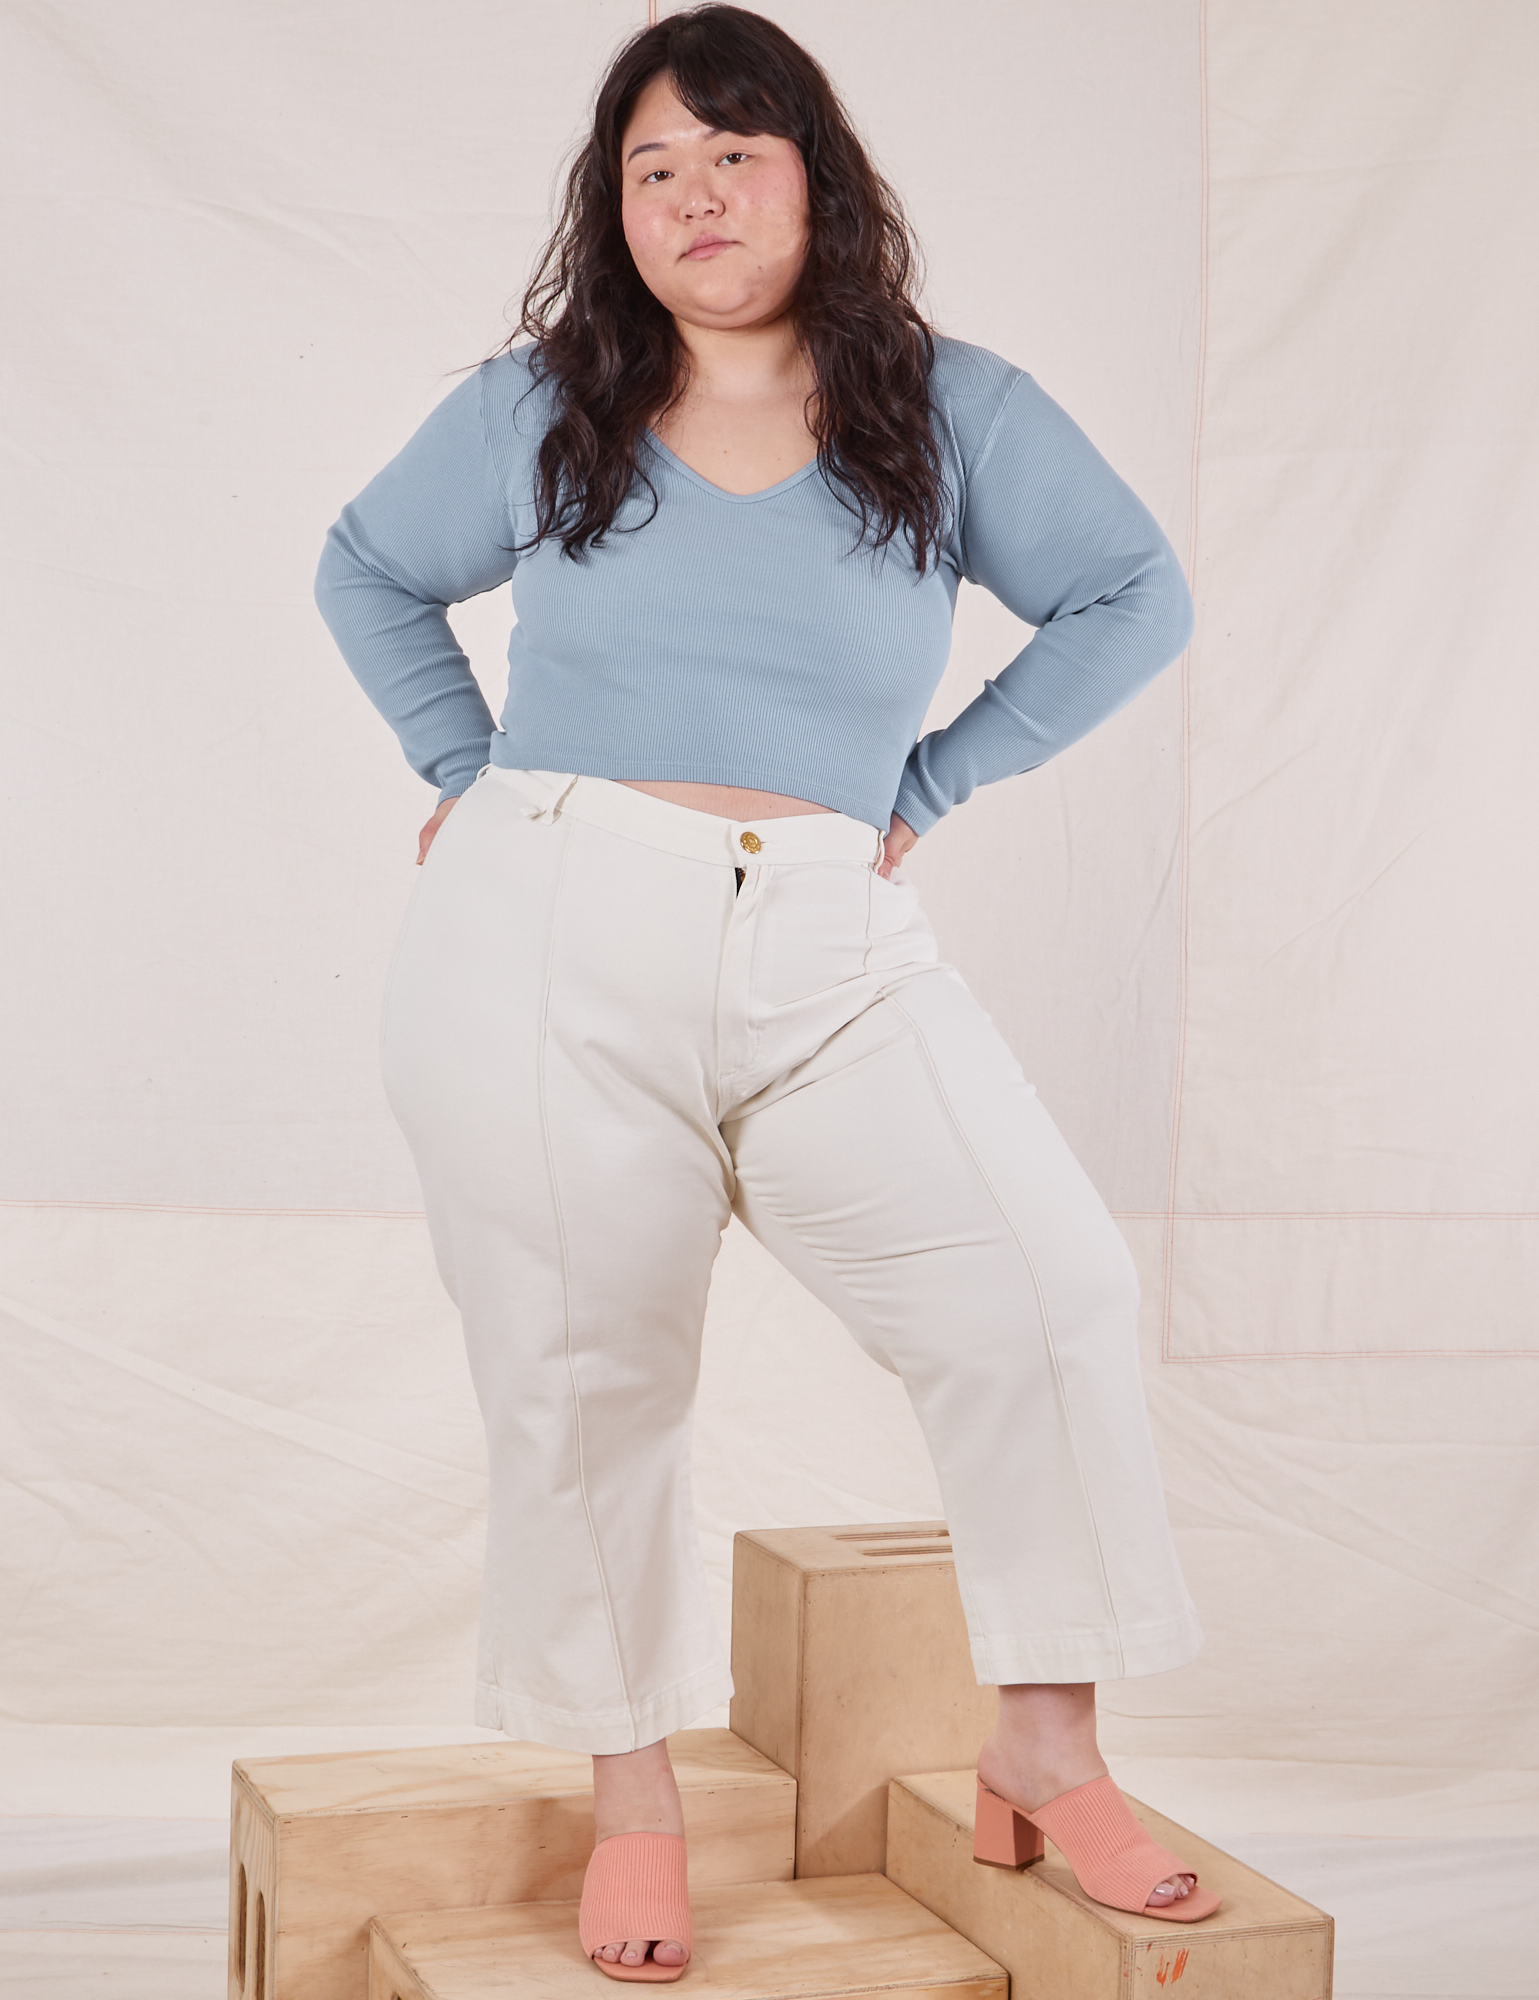 Ashley is wearing Long Sleeve V-Neck Tee in Periwinkle and vintage tee off-white Western Pants